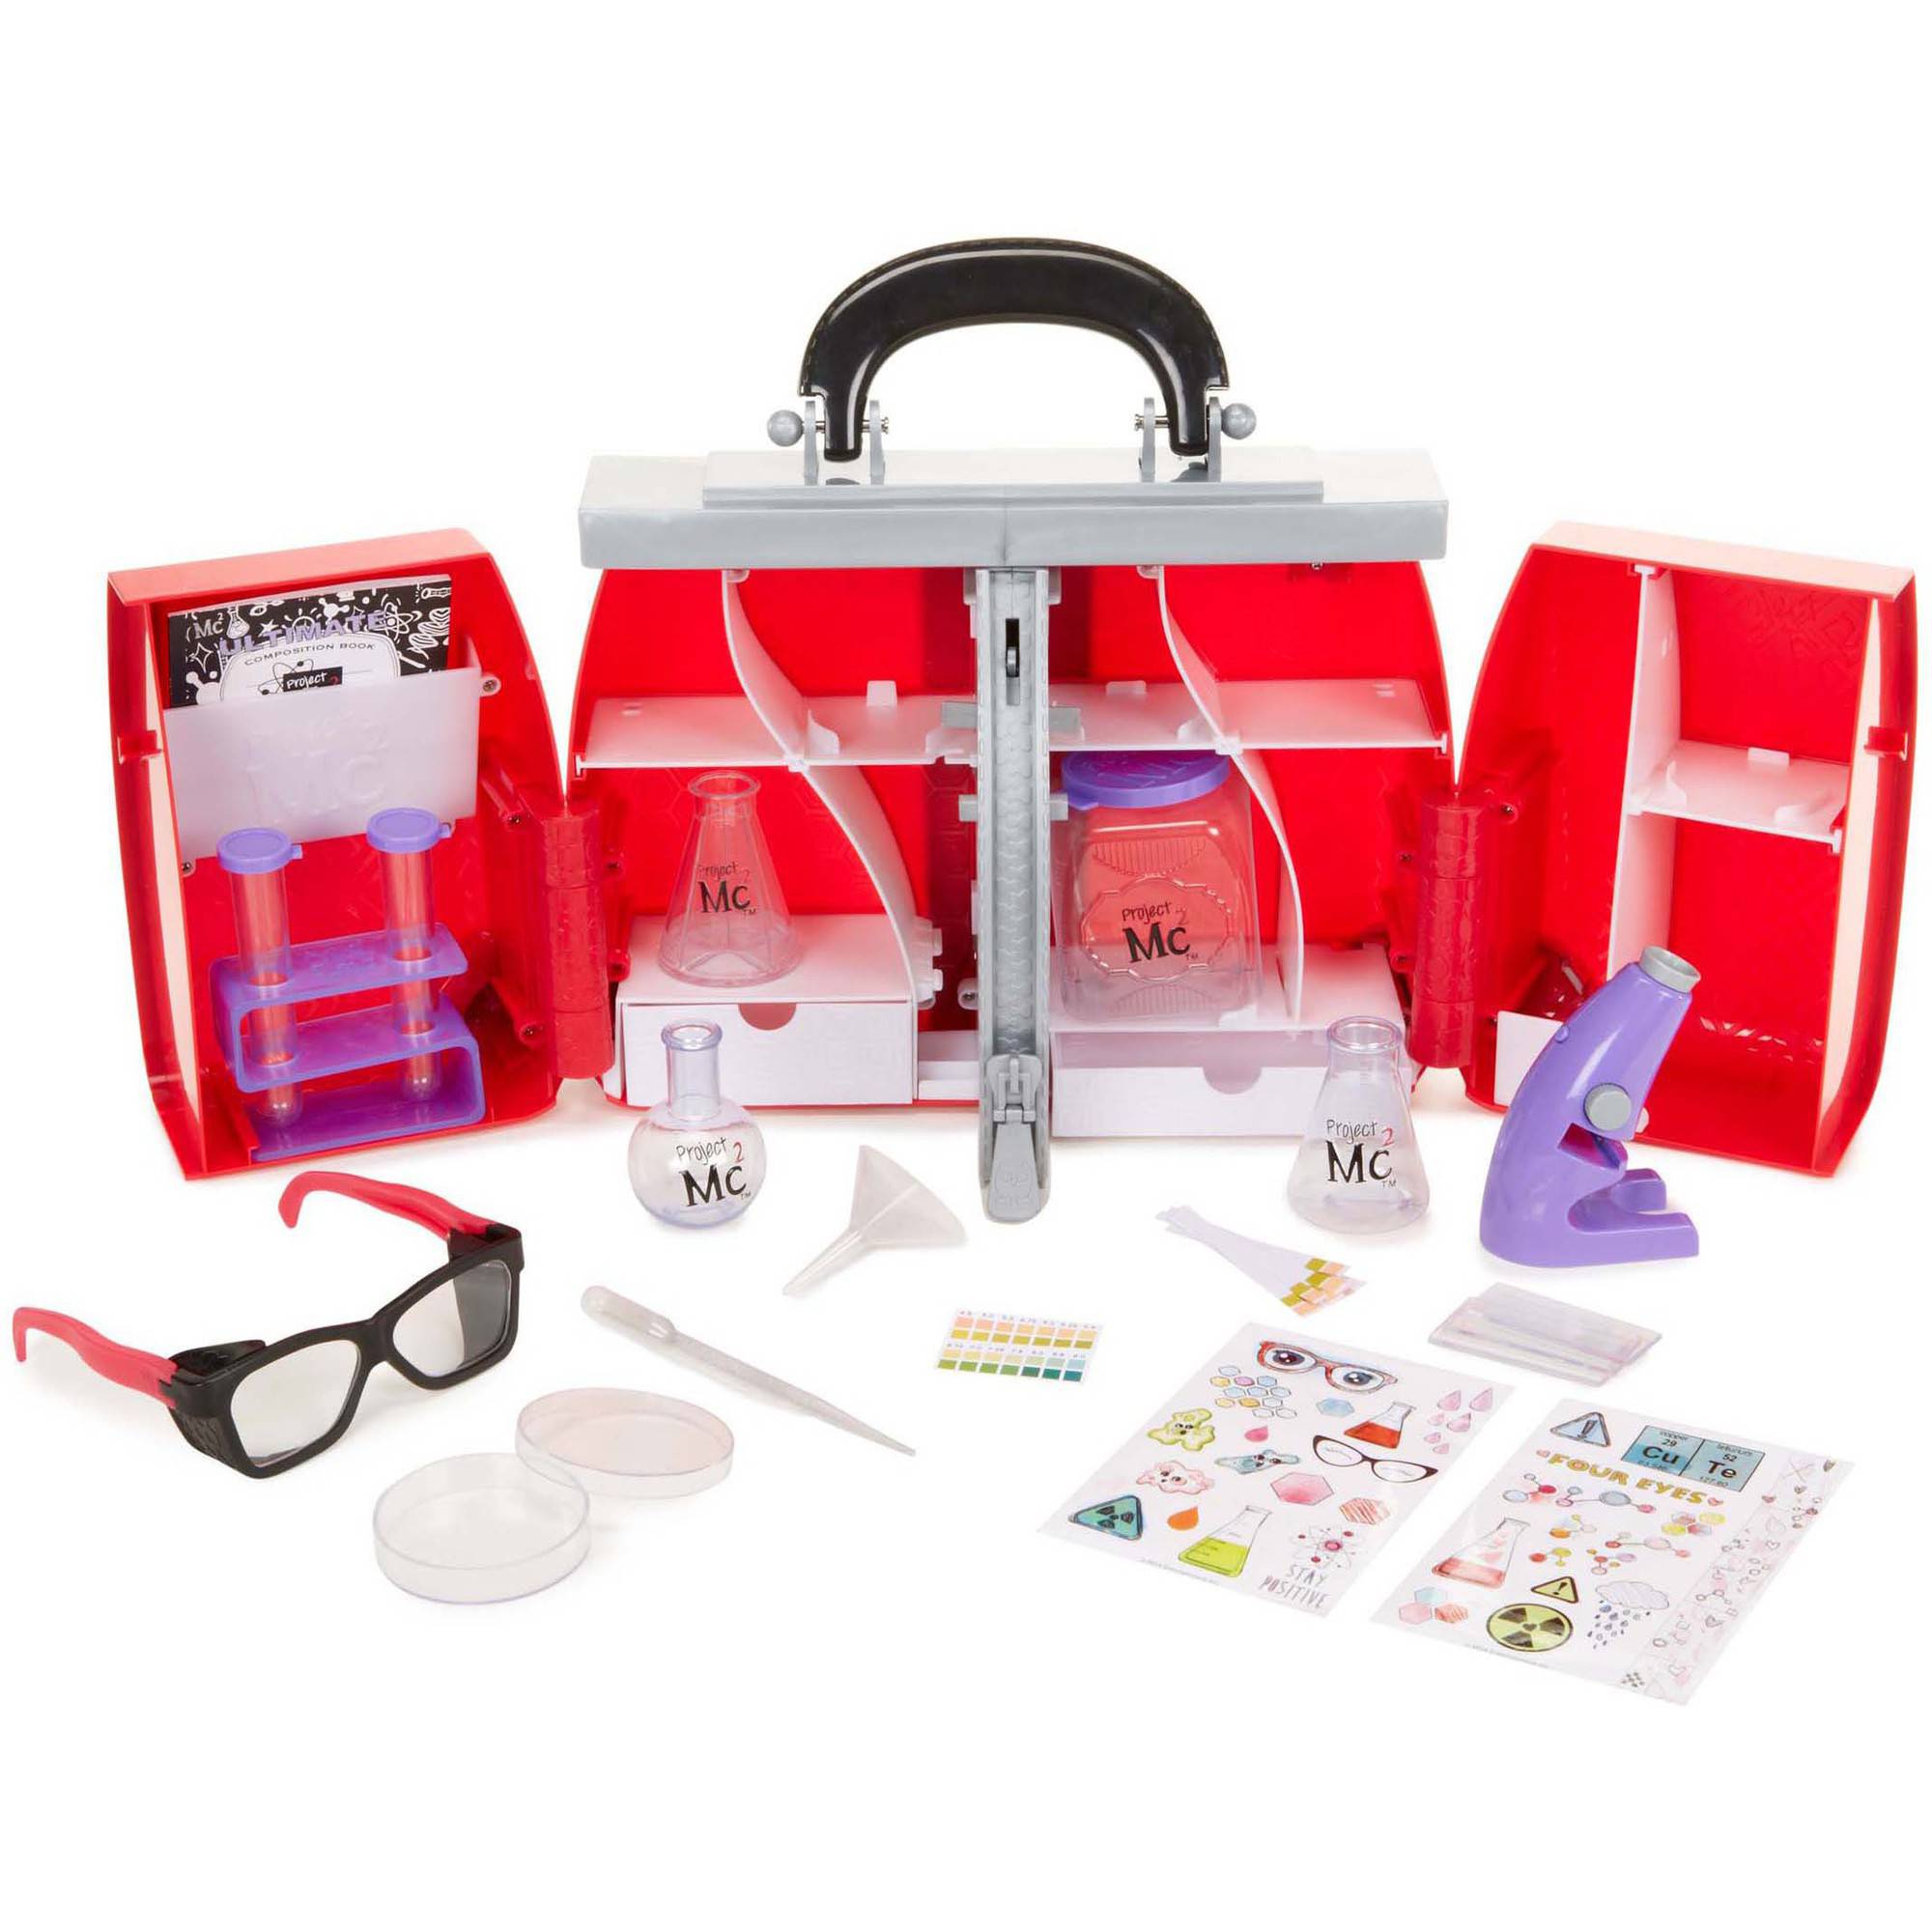 Project Mc2 Ultimate Lab Kit with 15+ Experiments - image 1 of 4